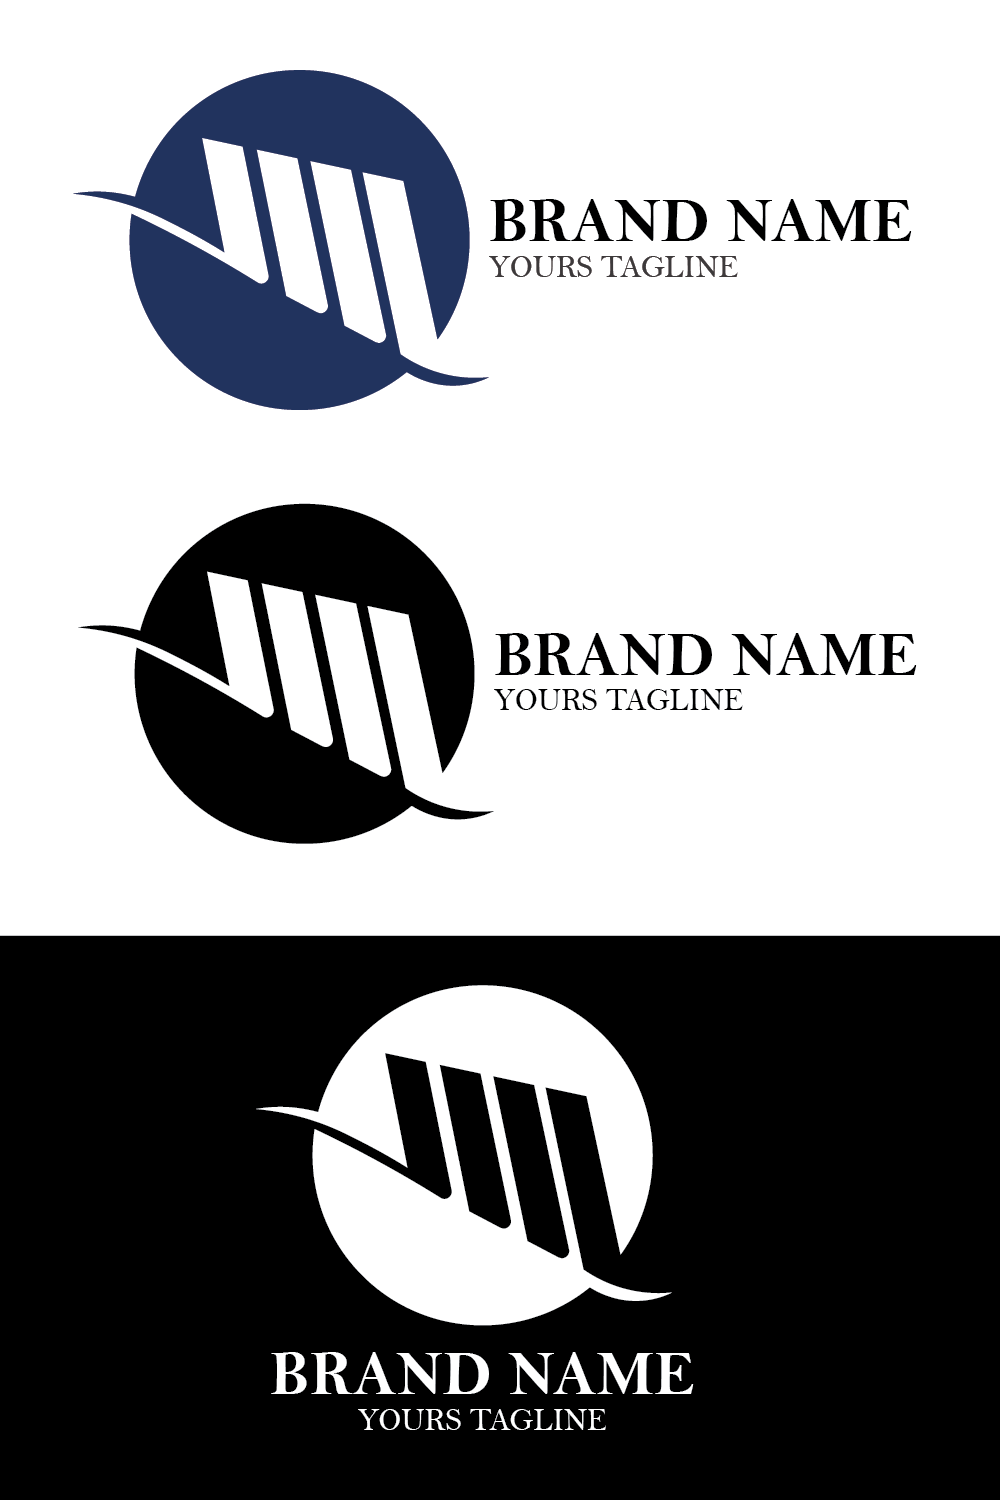 new and unique brand logo design || professional success logo design template for your company, brand and businesses pinterest preview image.